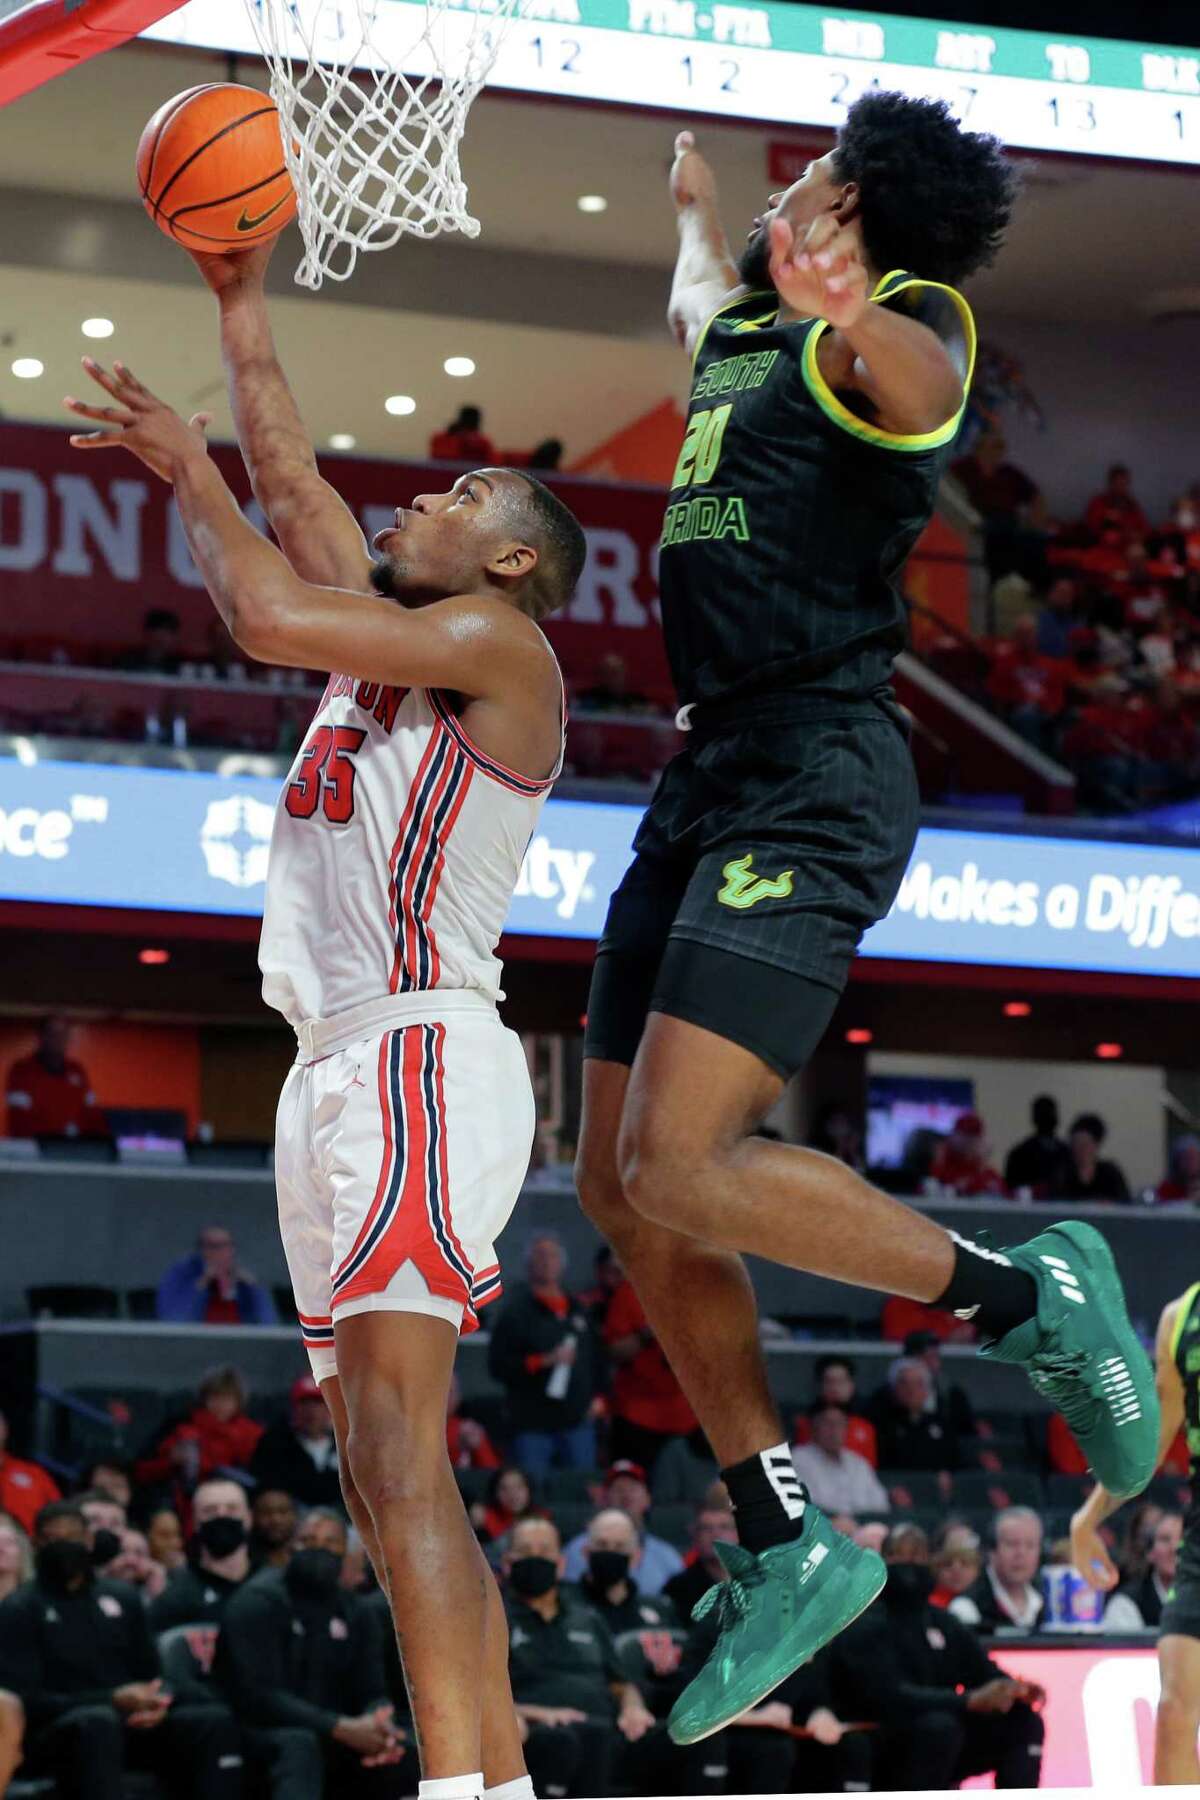 Houston forward Fabian White Jr. (35) puts up a shot in front of South Florida forward Sam Hines Jr. (20) during the second half of a NCAA basketball game Tuesday, Jan. 18, 2022 in Houston, TX.